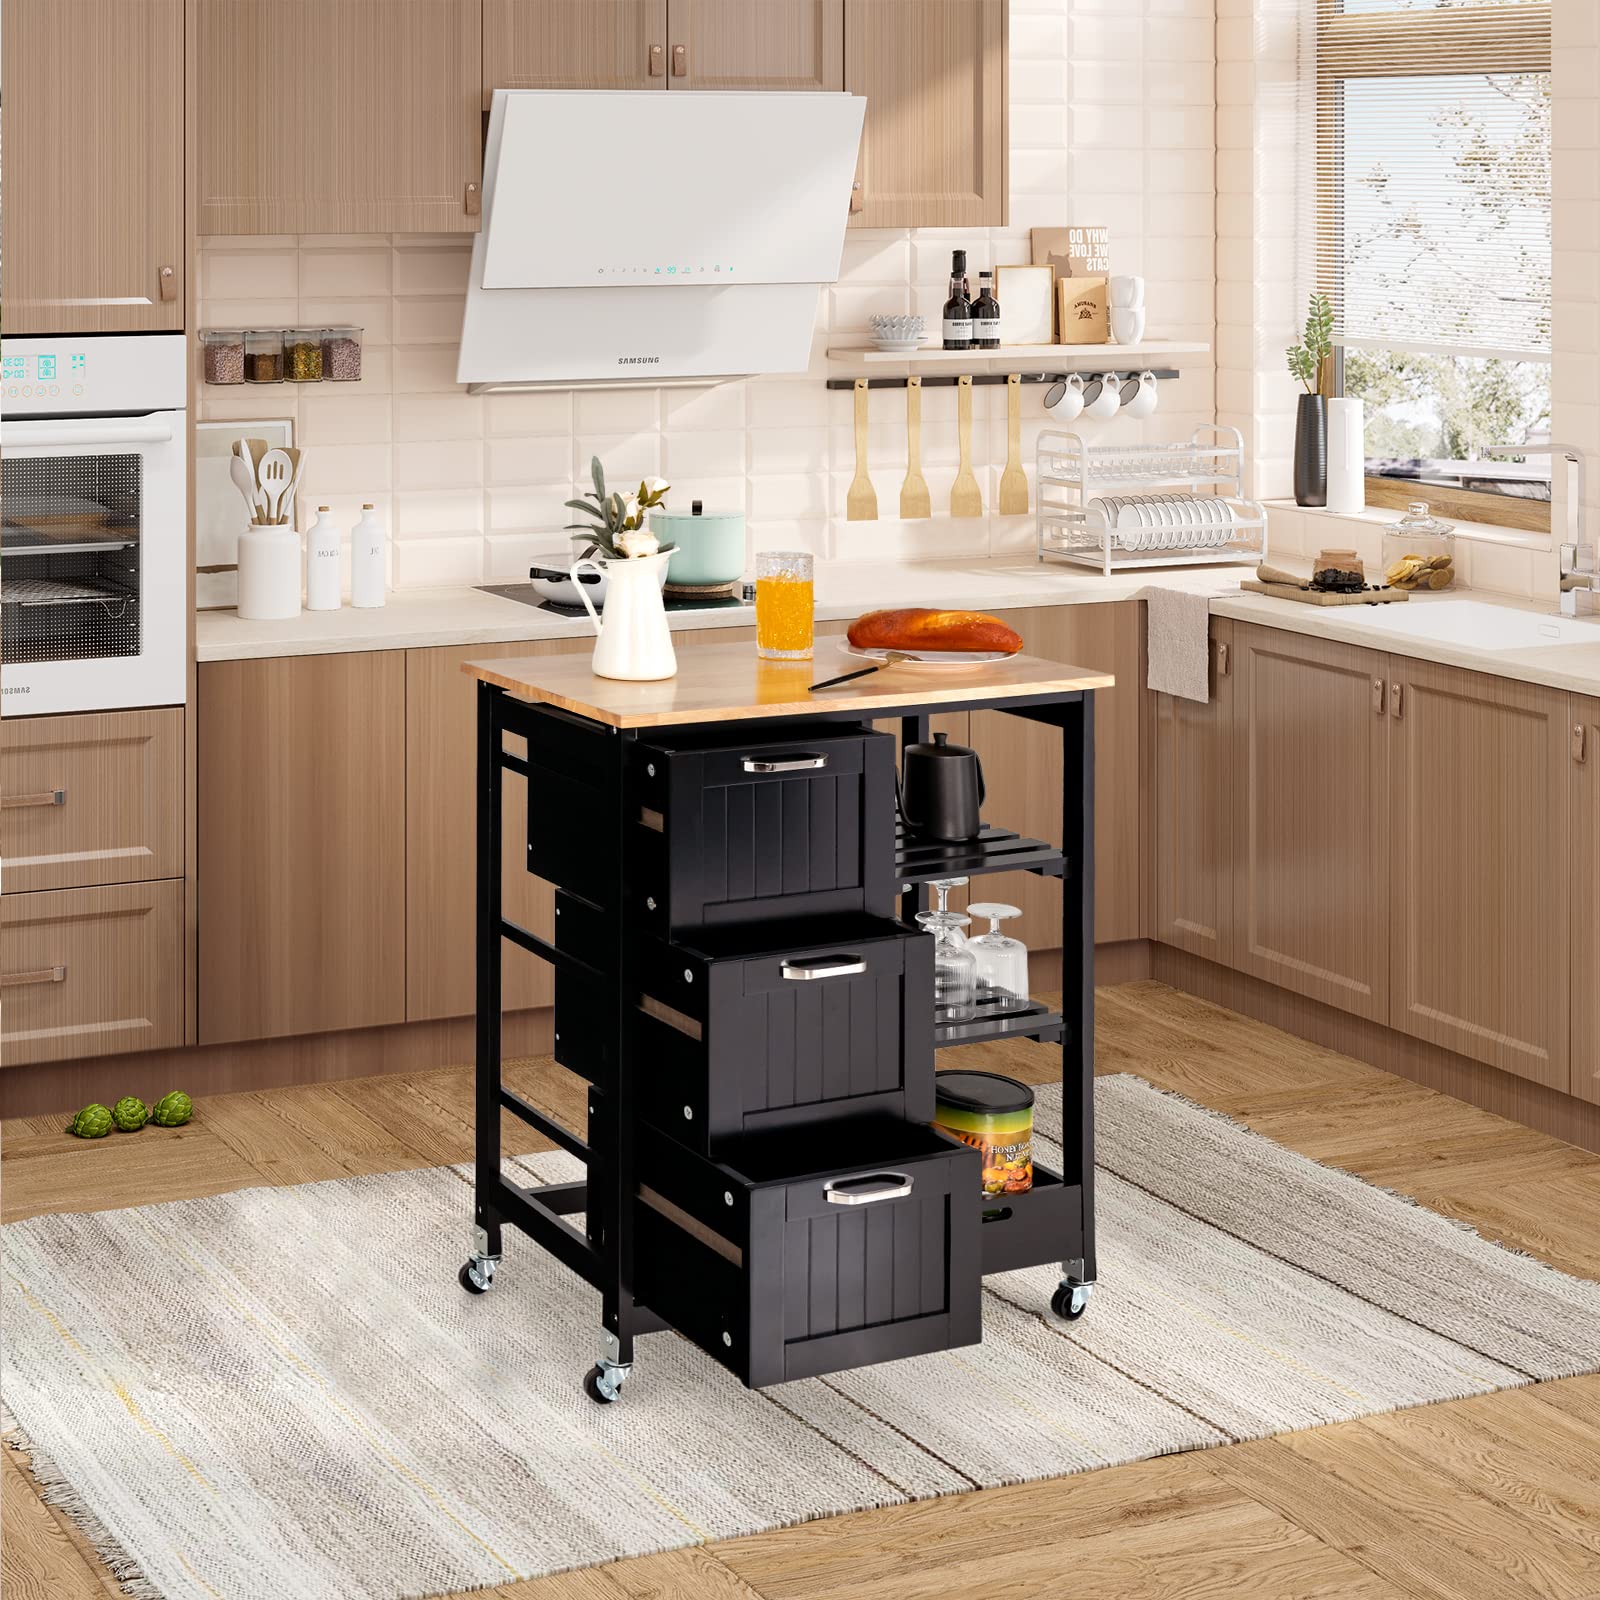 Giantex Kitchen Island Cart with Storage, Bar Serving Cart on Wheels with 3 Deep Drawers